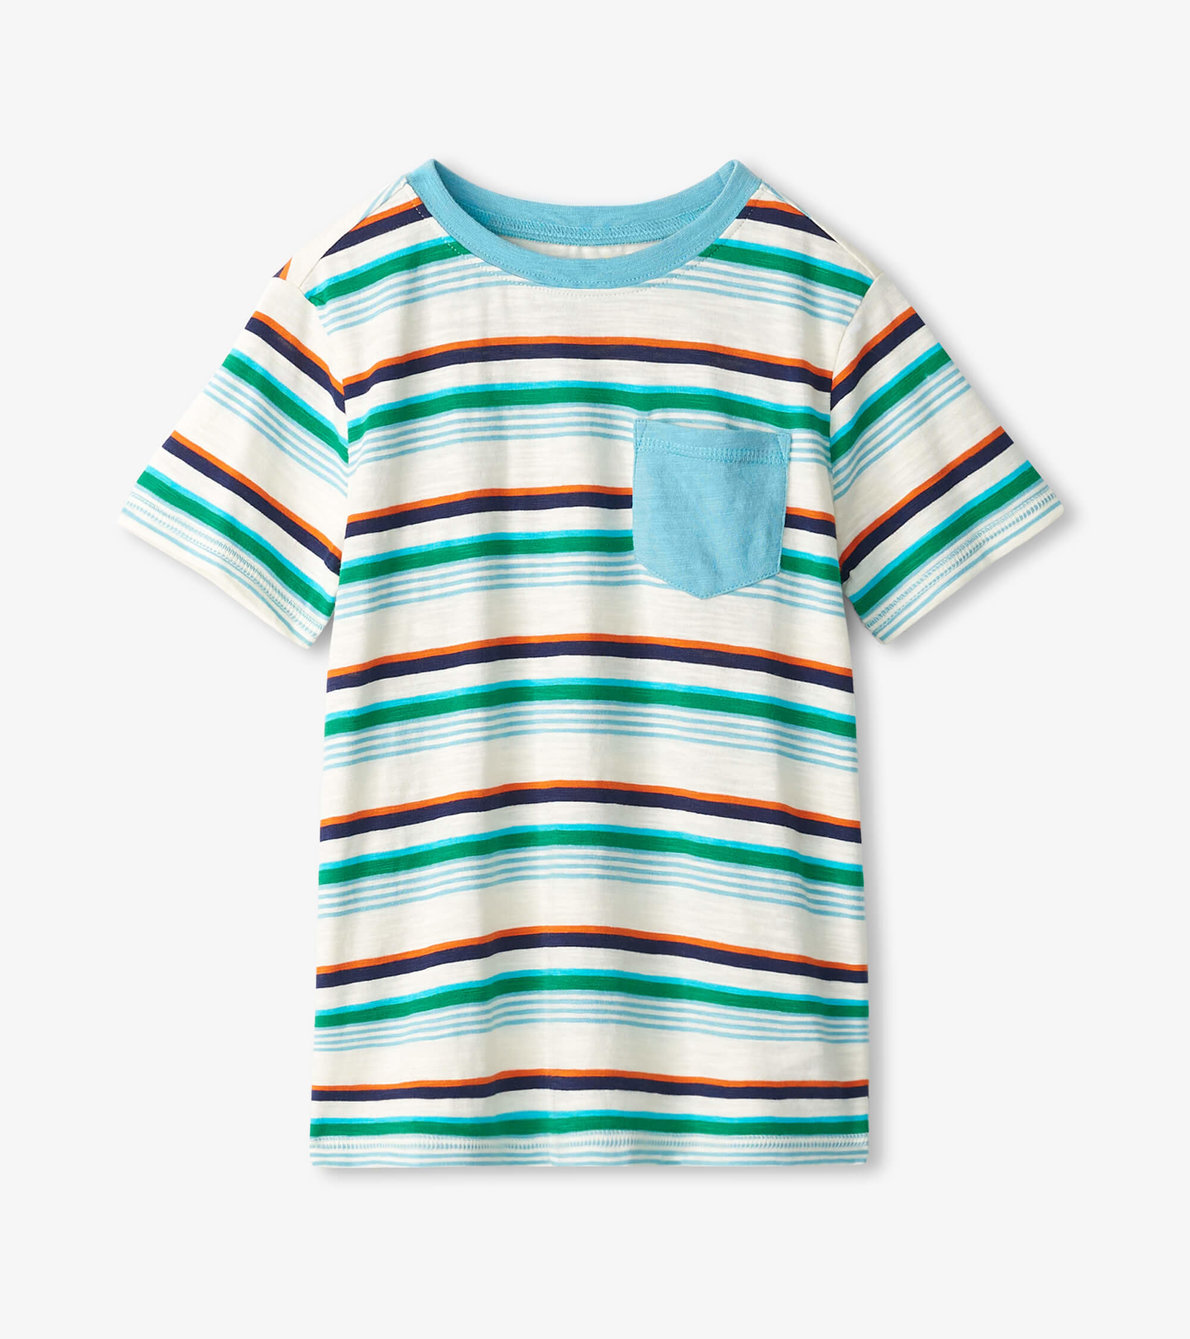 View larger image of Boys Hiking Stripes Pocket Tee